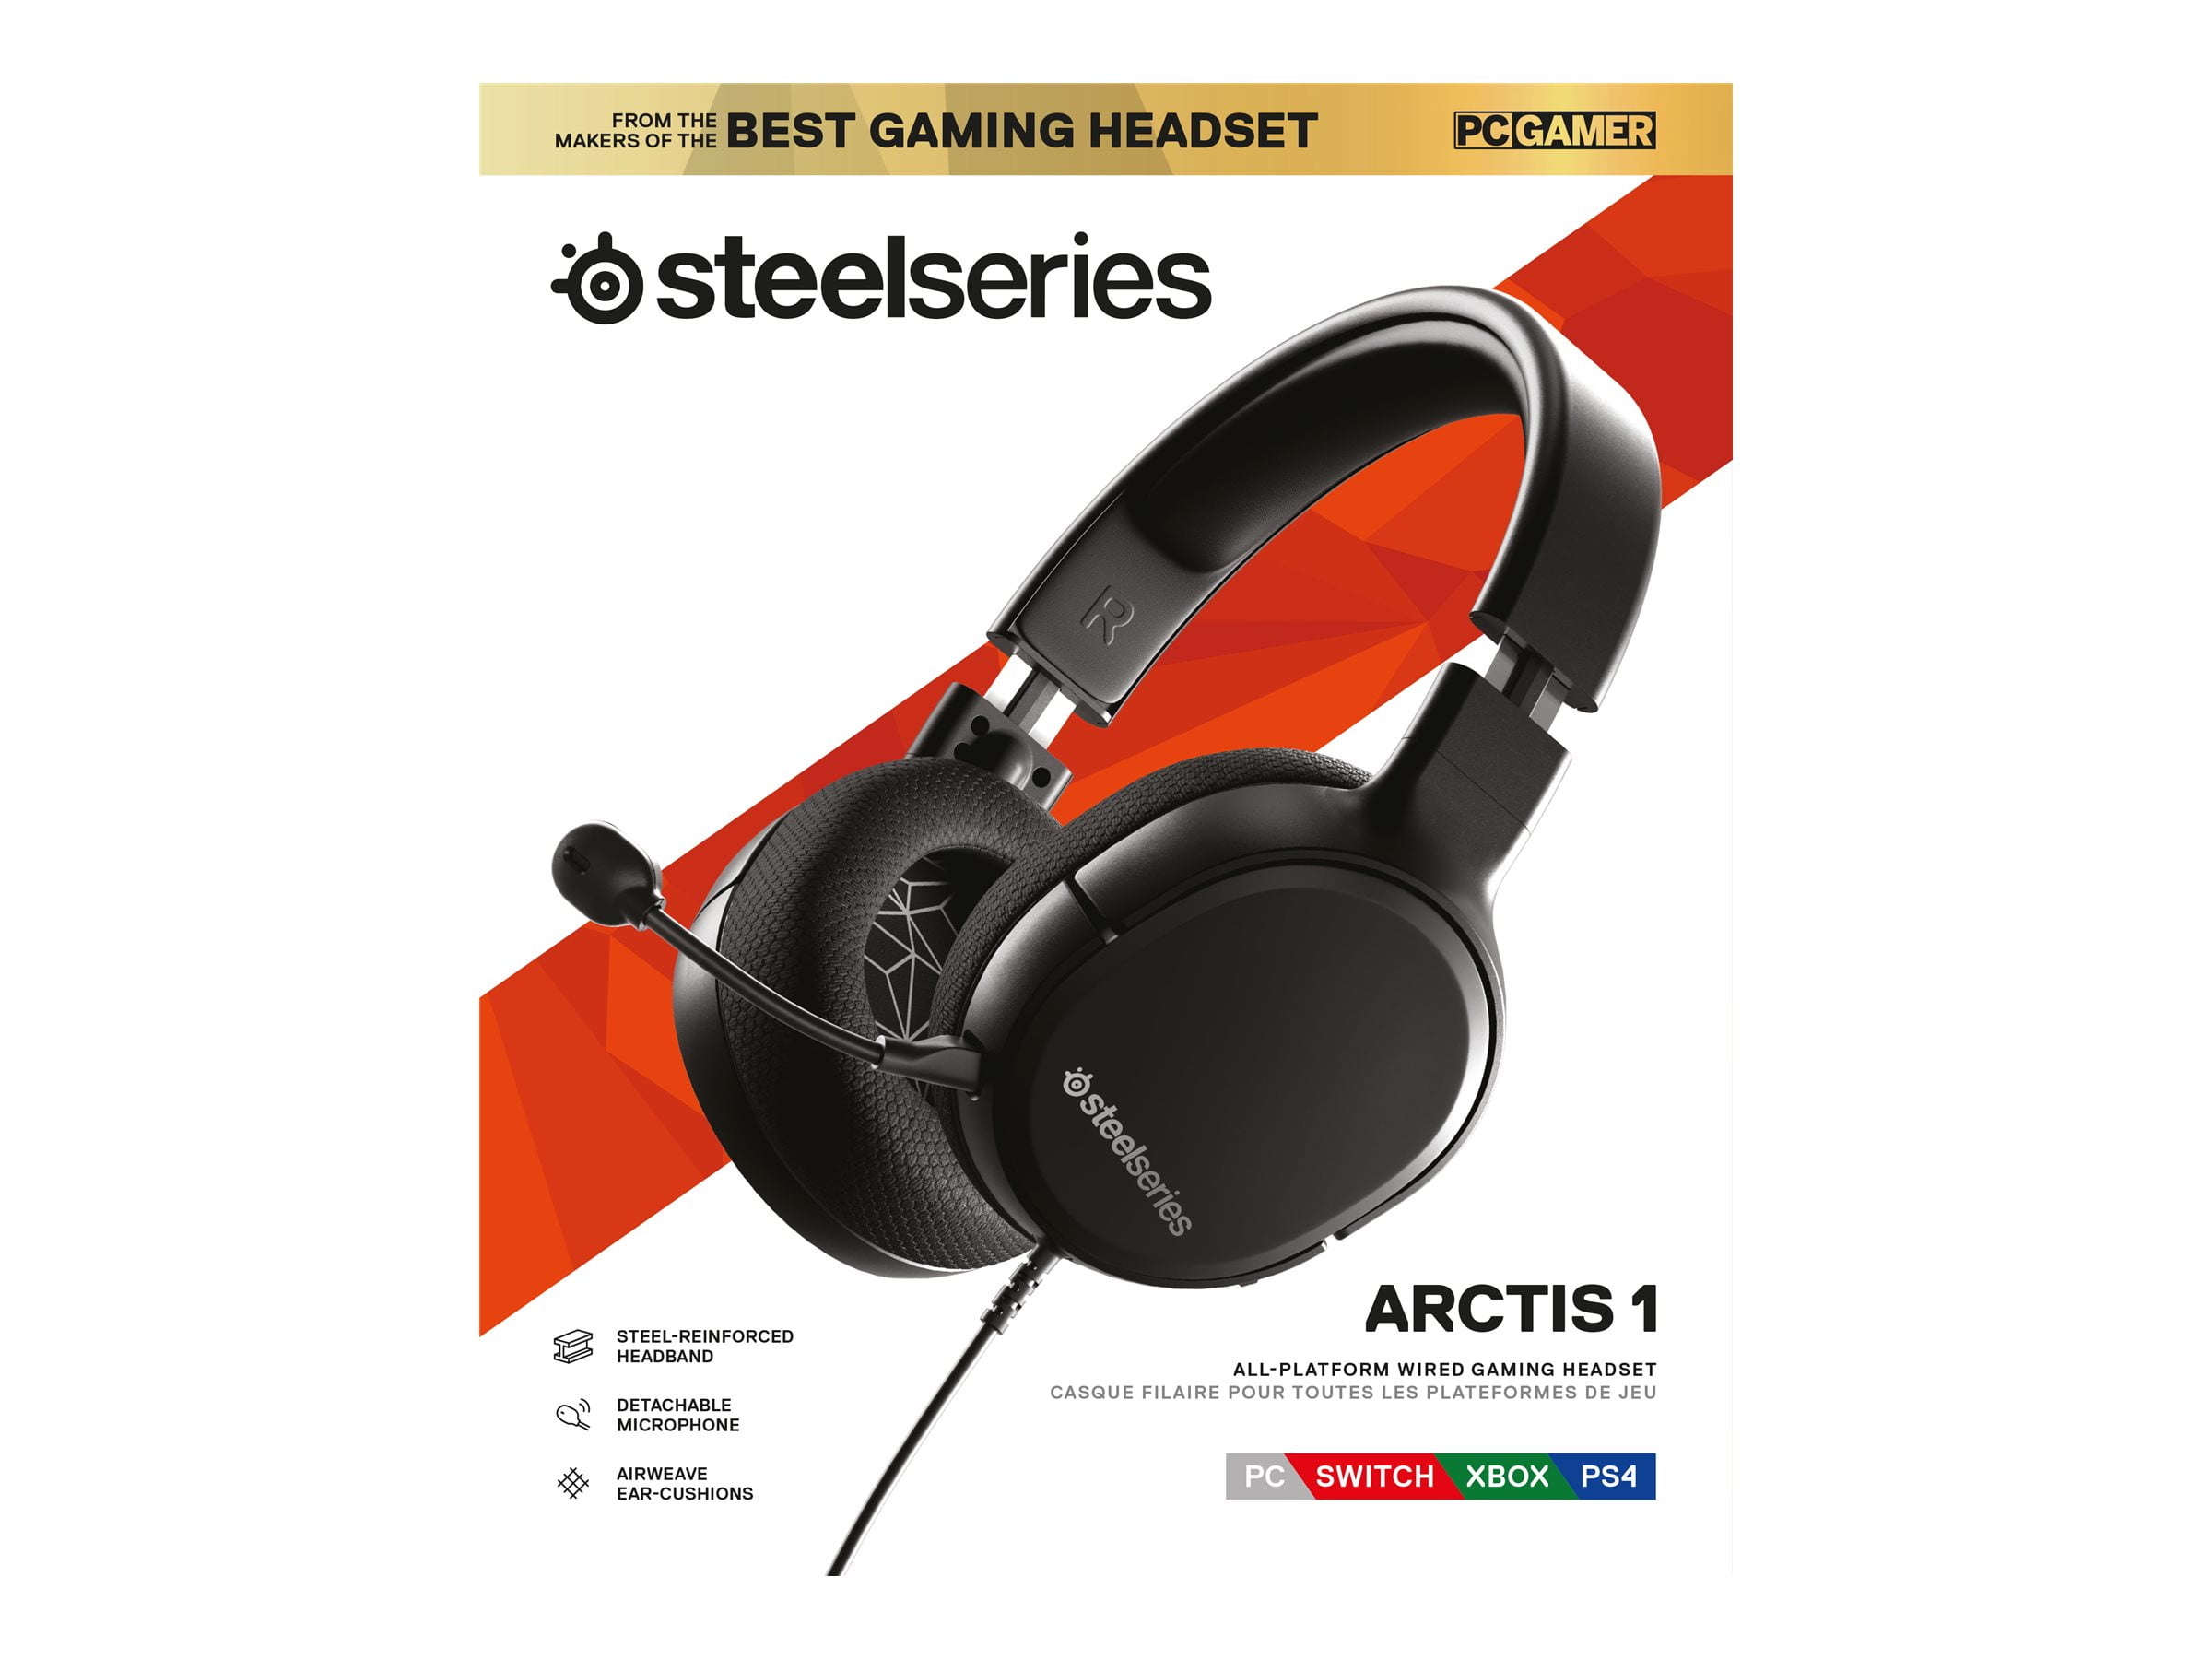 module titel doen alsof SteelSeries Arctis 1 Wireless Gaming Headset - USB-C Wireless - Detachable  Clearcast Microphone - for PS4, PC, Nintendo Switch and Lite, Android -  Black - Playstation 4 - Walmart.com